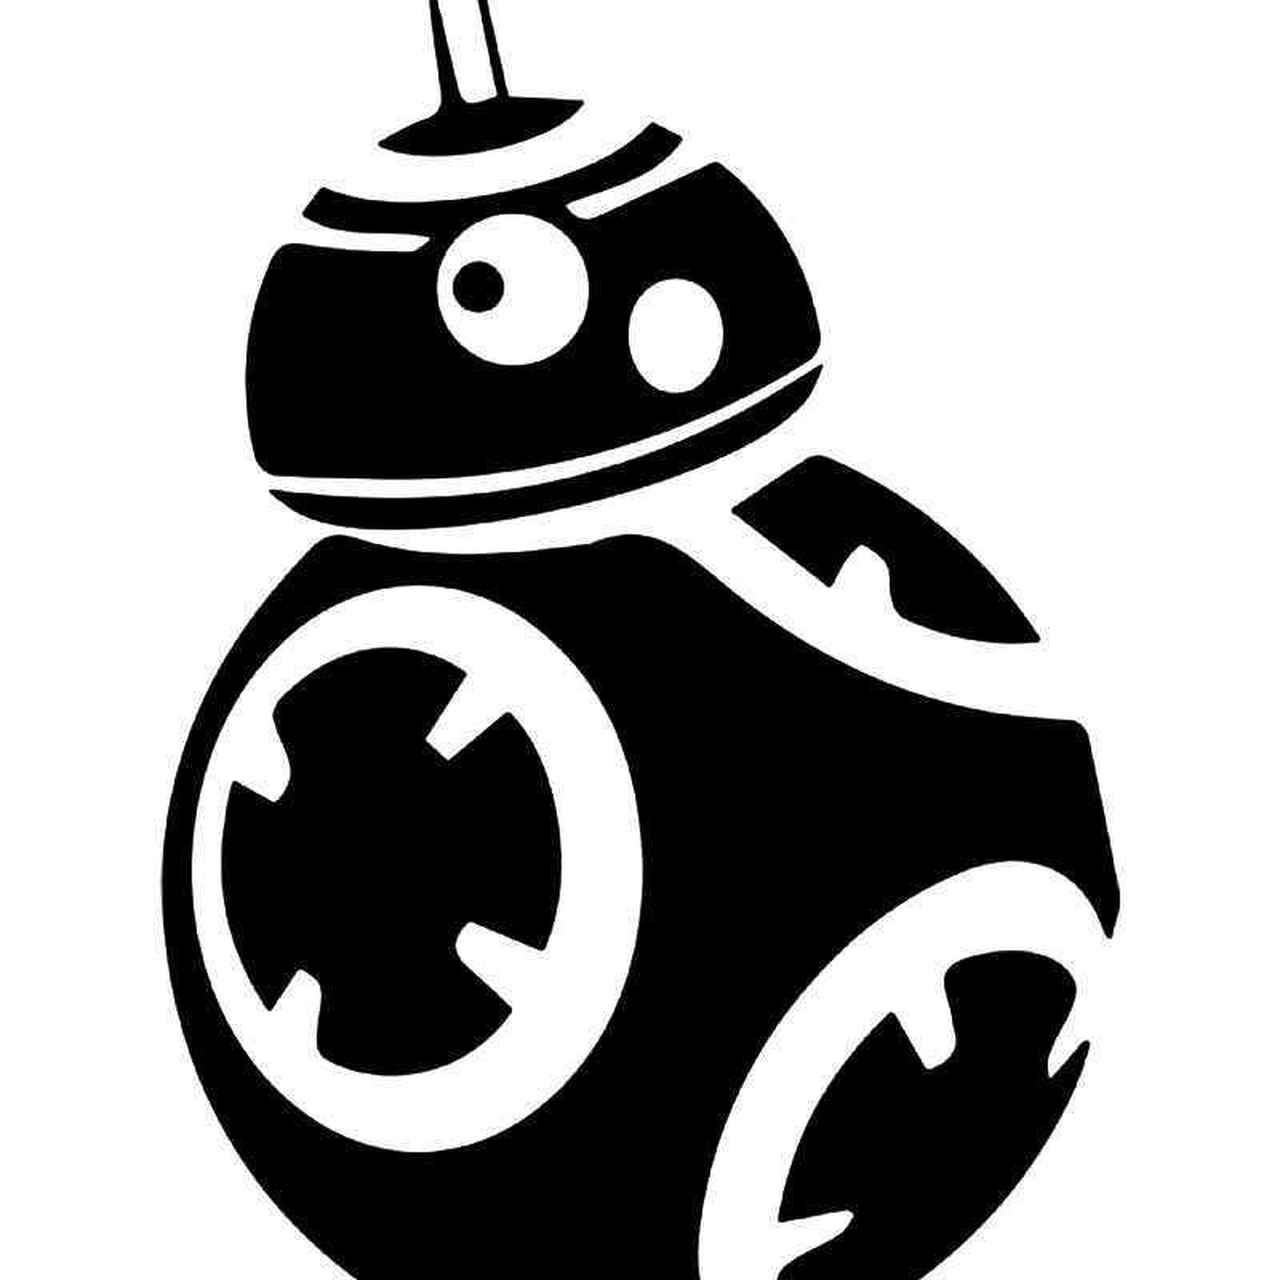 Bb8 clipart stencils, Bb8 stencils Transparent FREE for download on